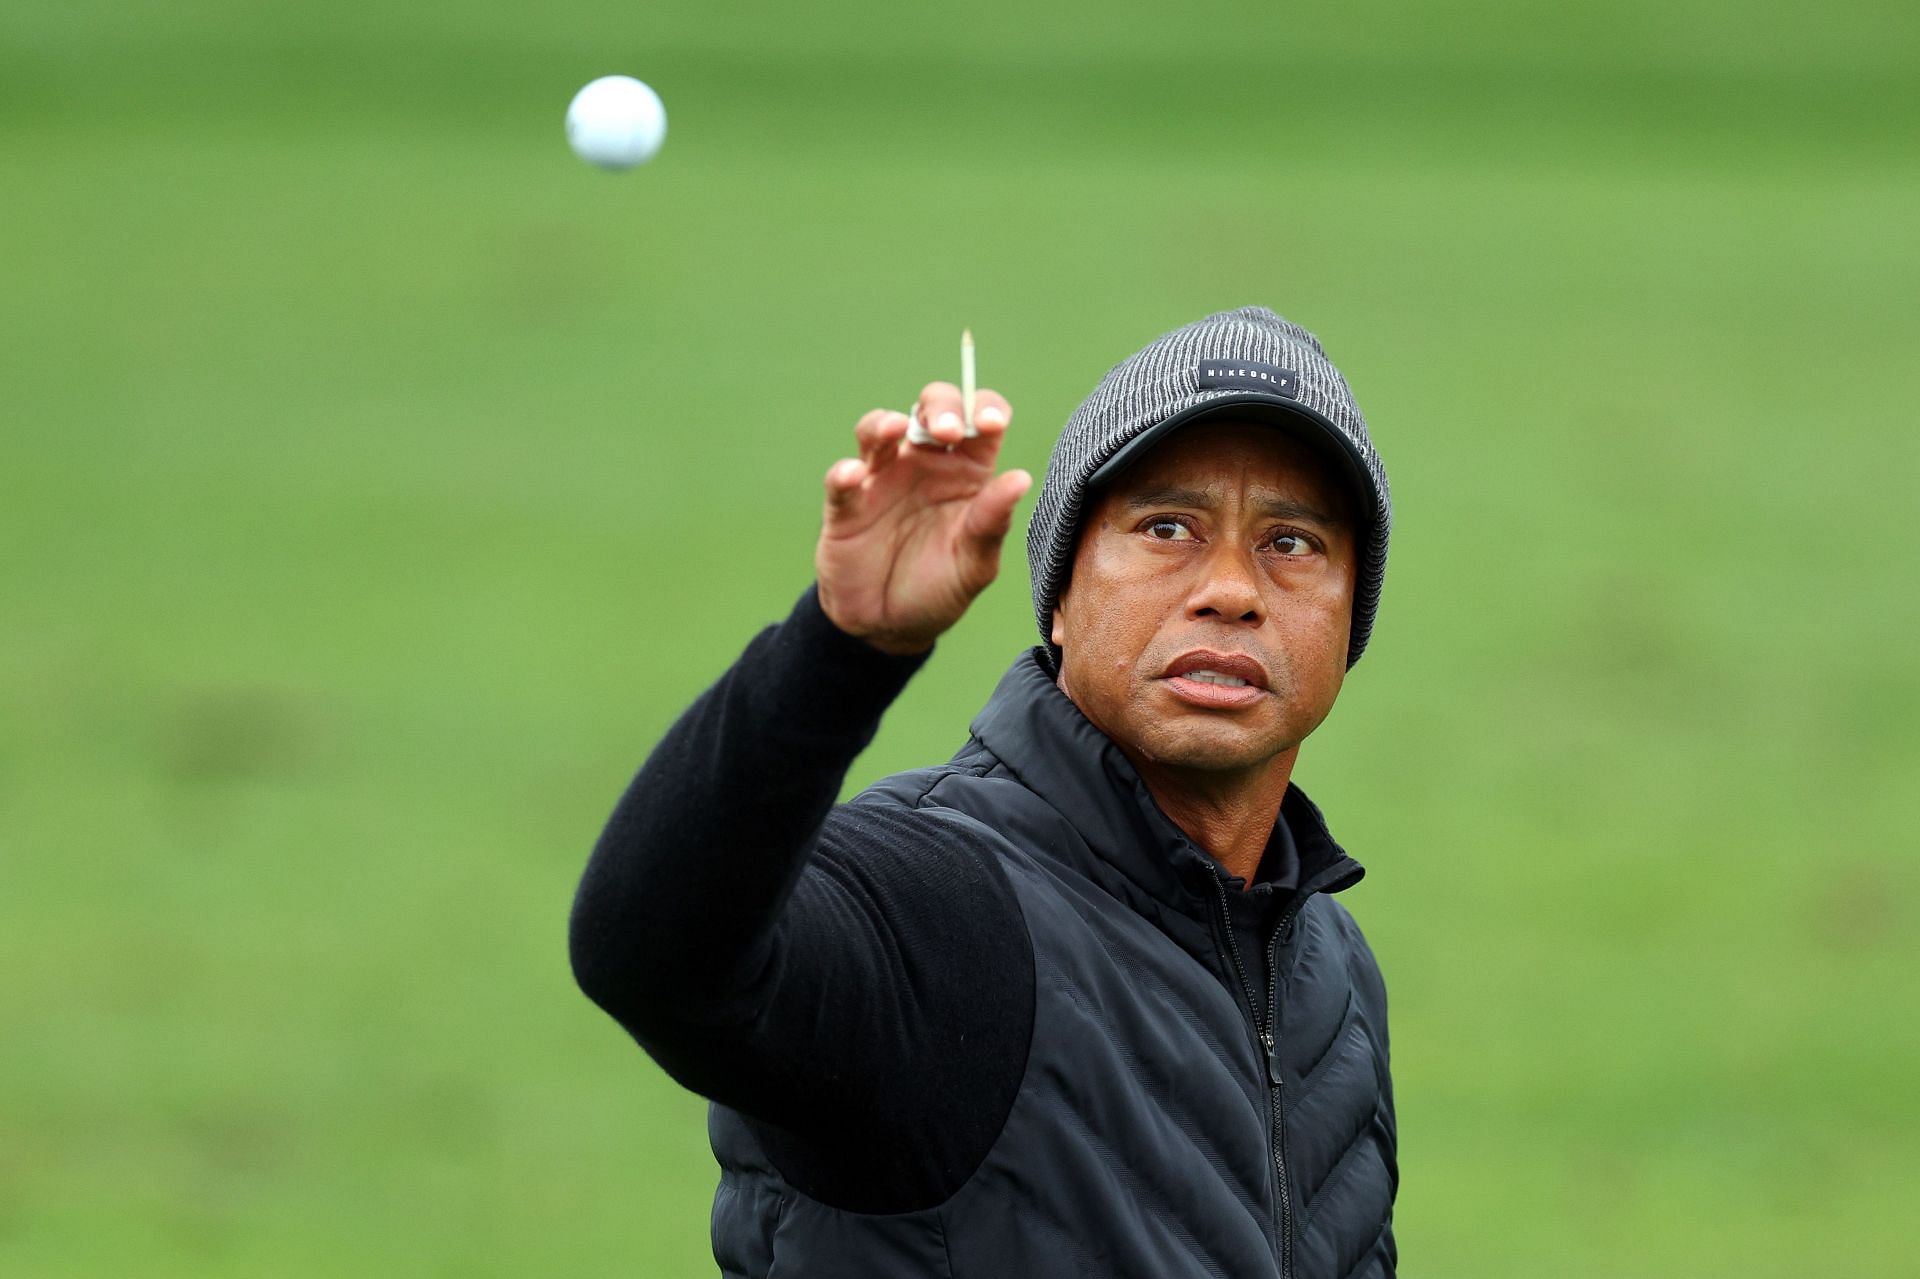 Tiger Woods at The Masters (Image via Getty)